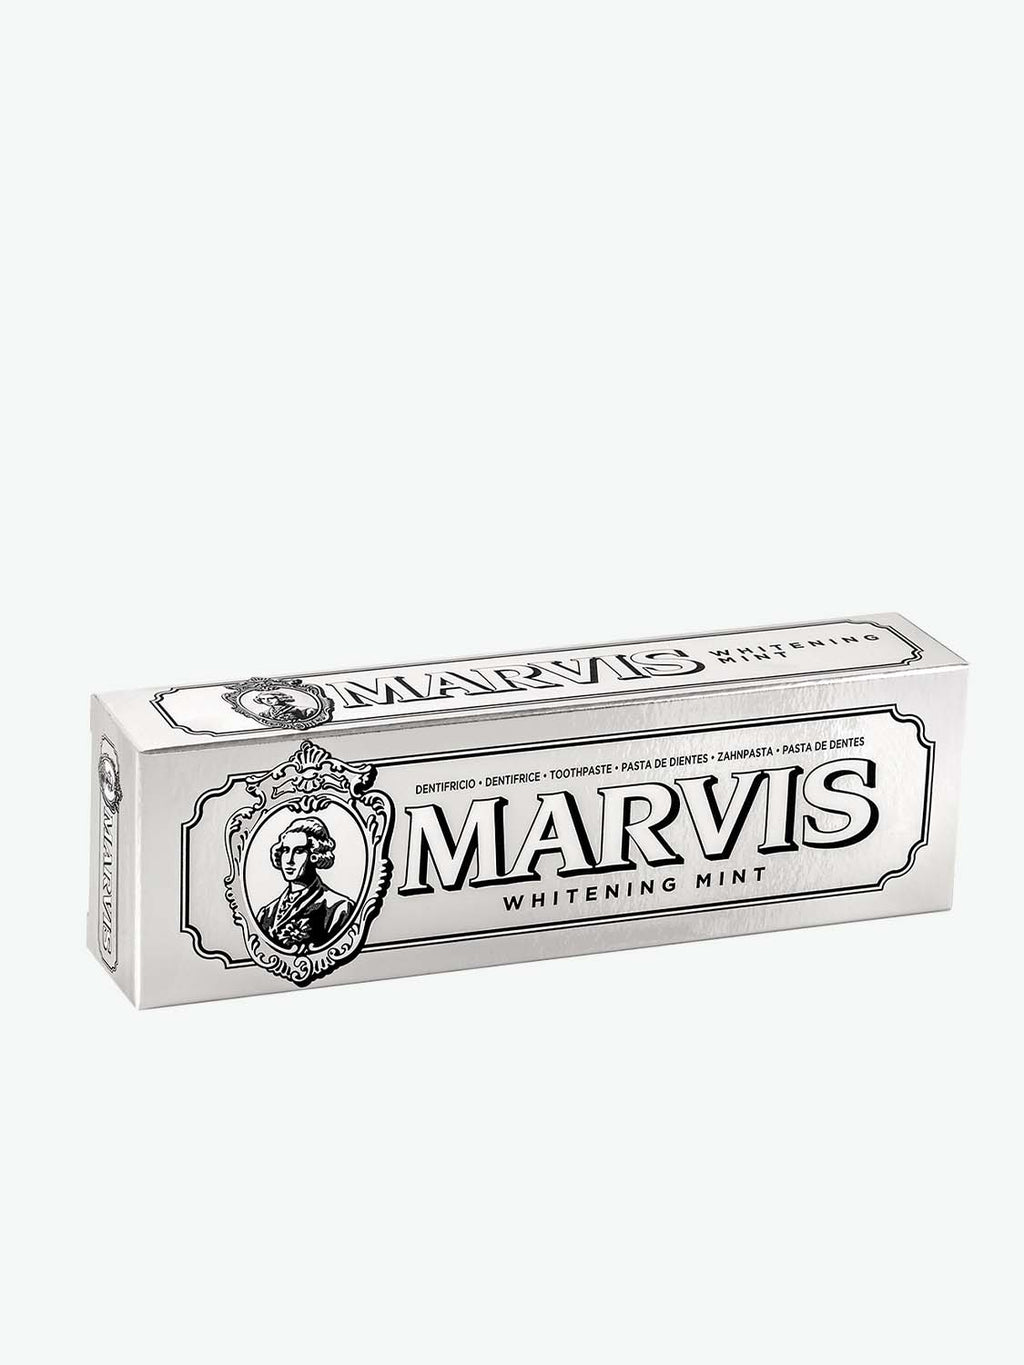 Marvis Whitening Mint Toothpaste XXL Limited Edition